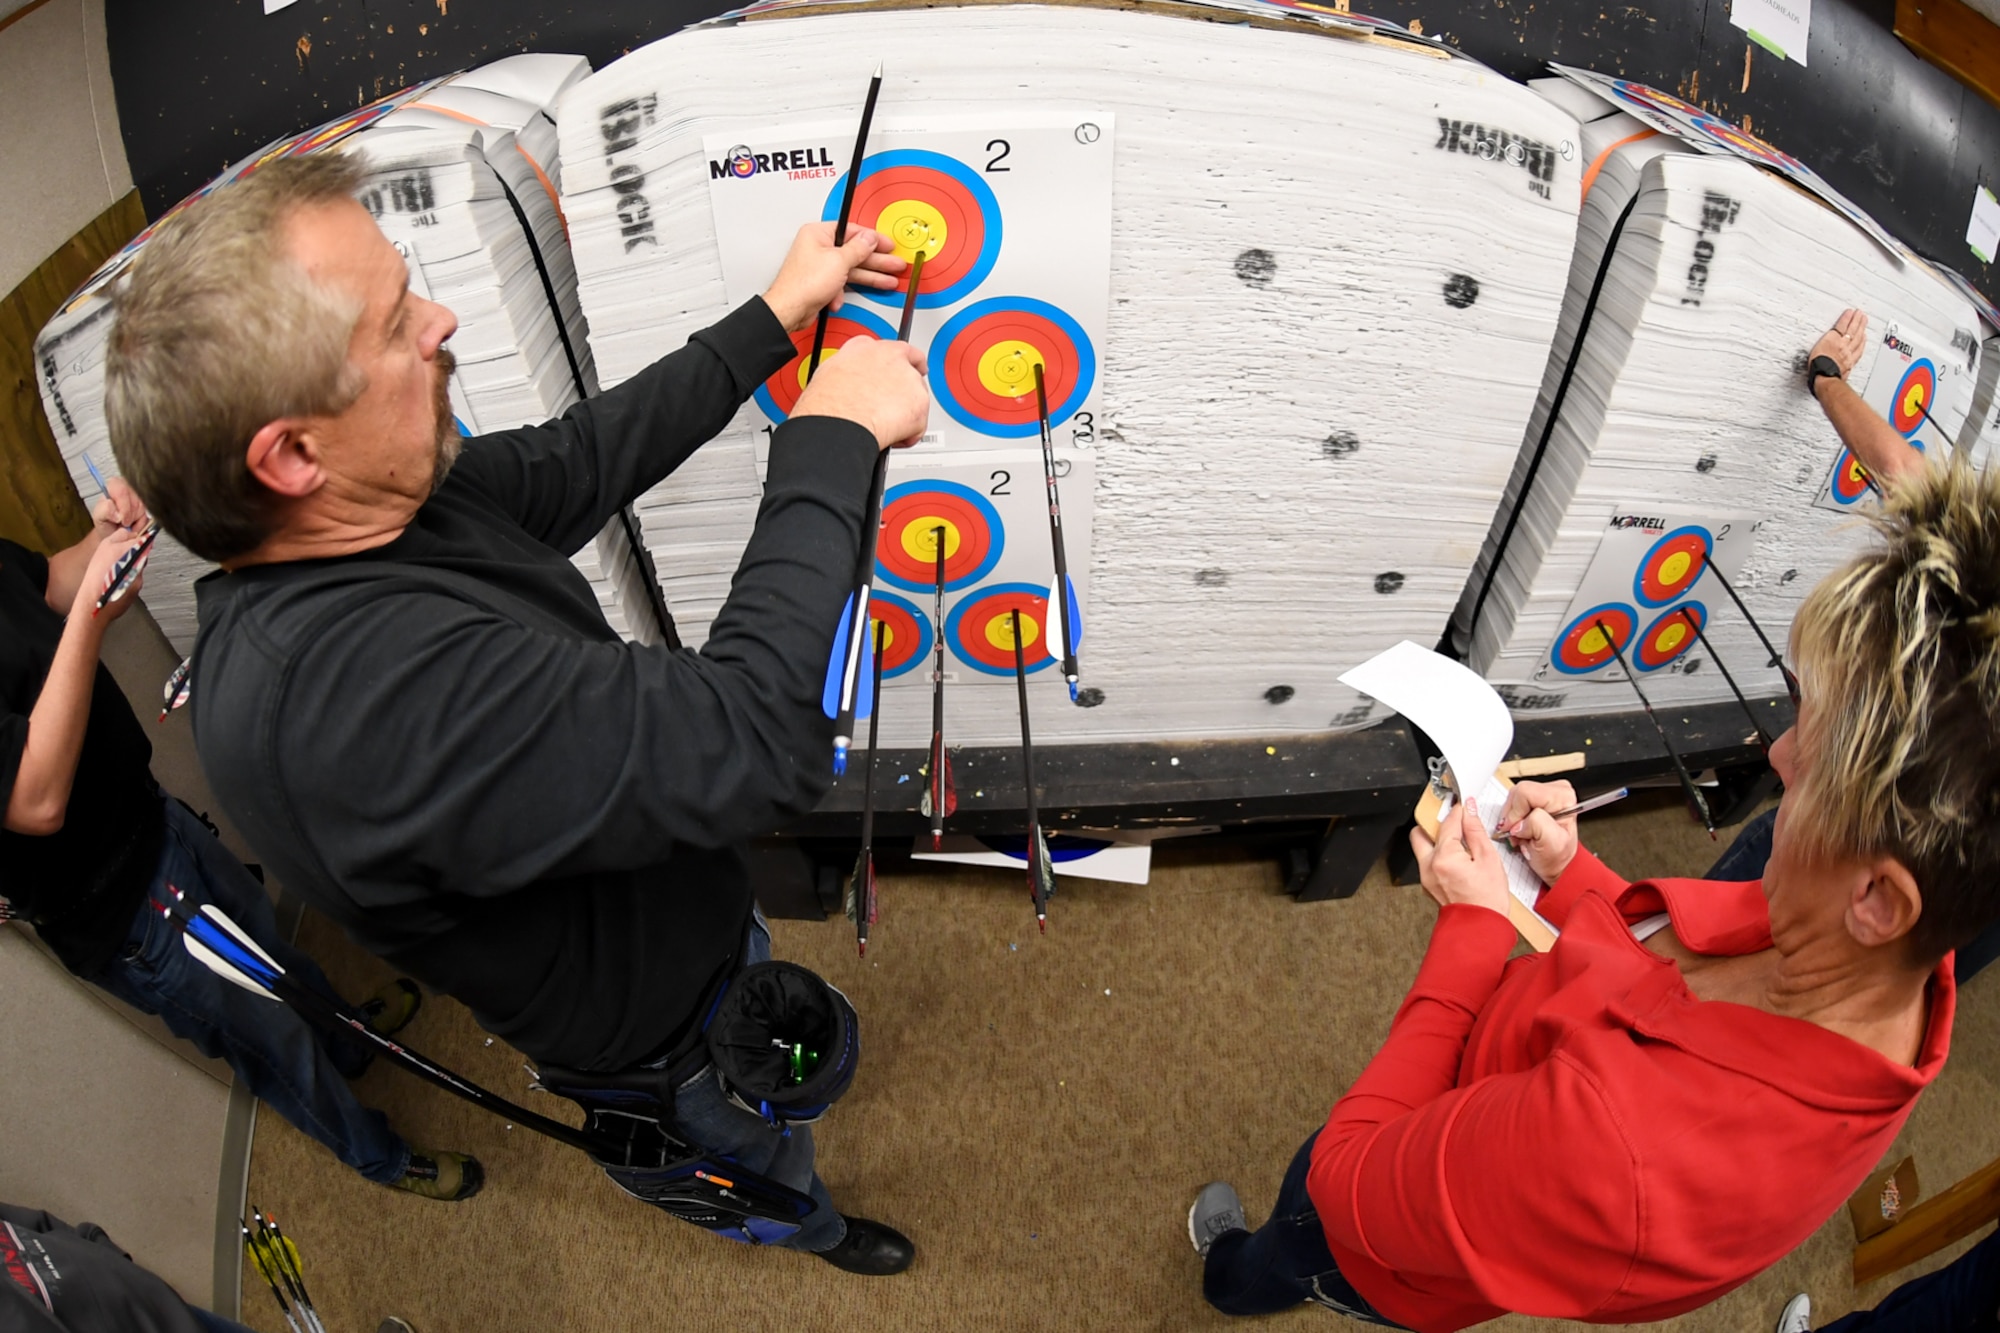 Hill Archery Club members Brian Wade and Shellay Williams tally up their points during a club league night Dec. 13, 2018, at Hill Air Force Base, Utah. The 20-yard indoor range at Hill’s archery clubhouse houses five lanes for shooting. There are also four different outdoor ranges. (U.S. Air Force photo by Cynthia Griggs)